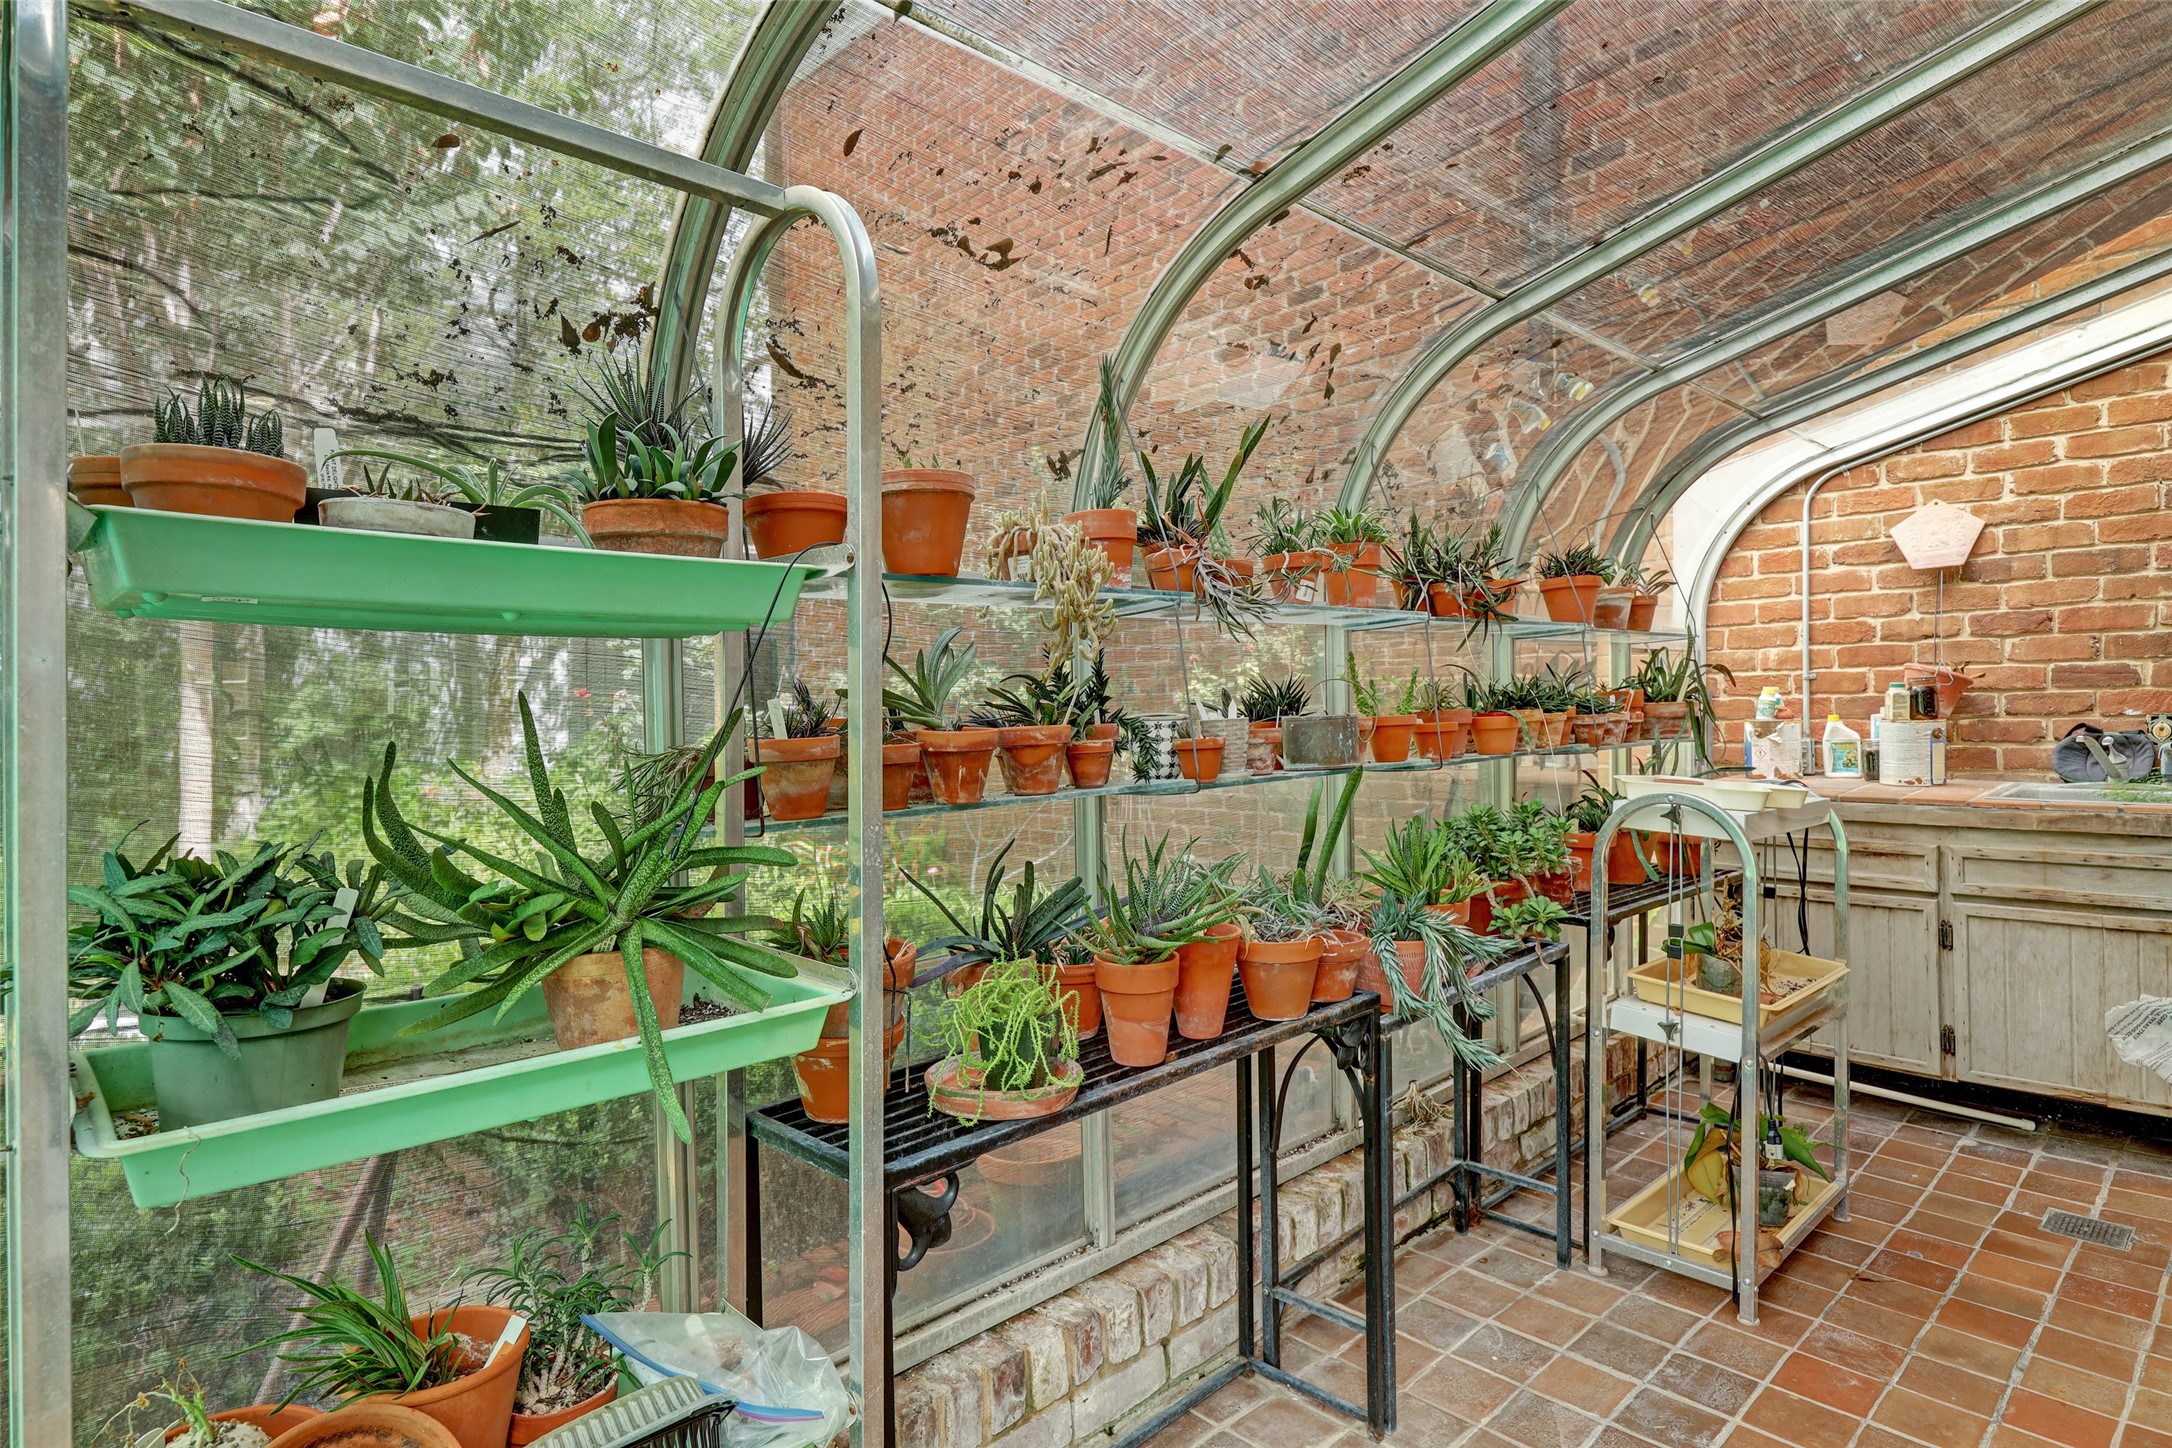 At the rear of the home, a greenhouse stands as a testament to the homeowner's love for gardening and nurturing plants.